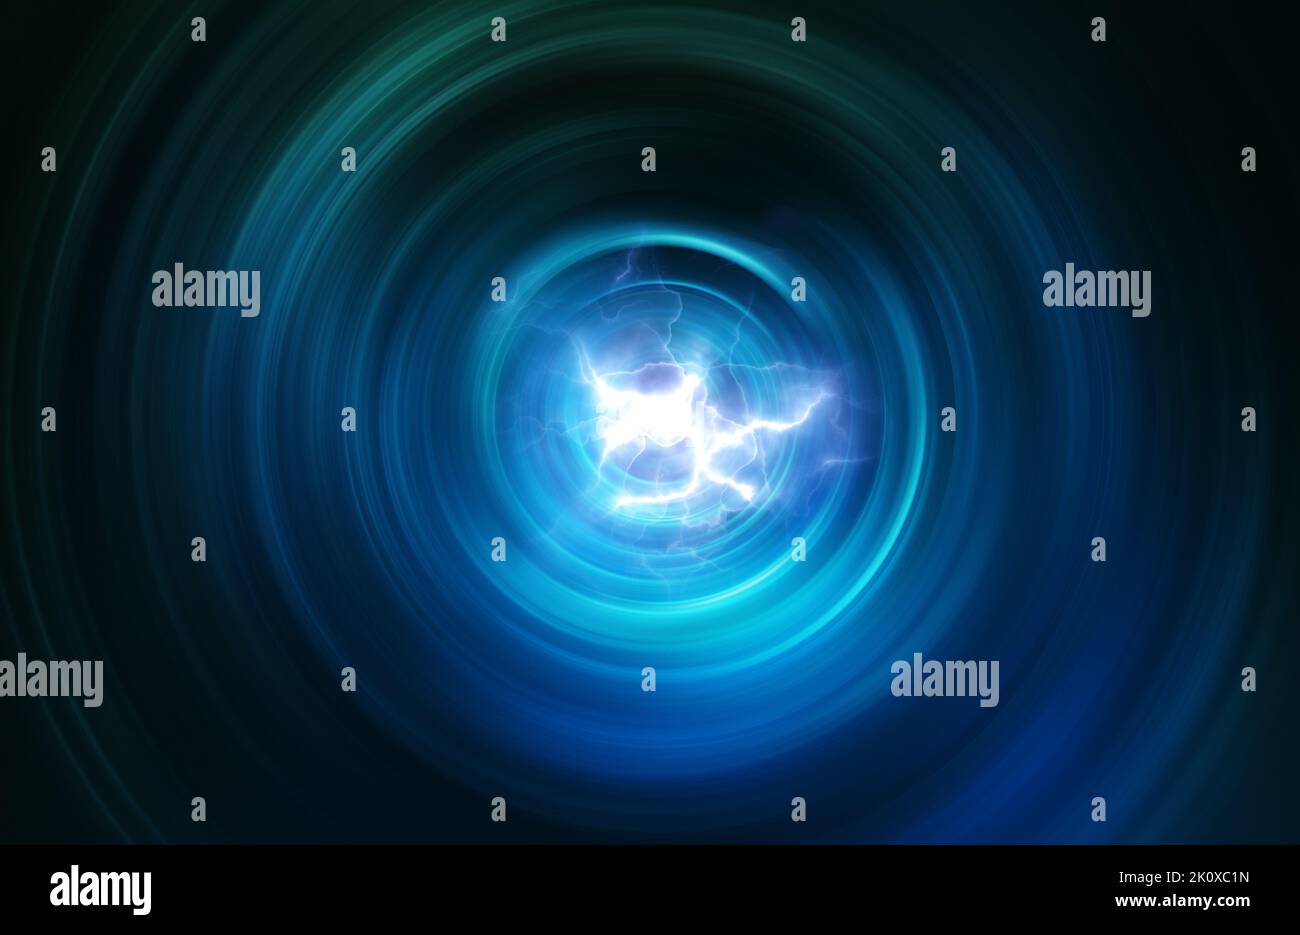 blue asbtract radial background with energy lights at the center Stock Photo